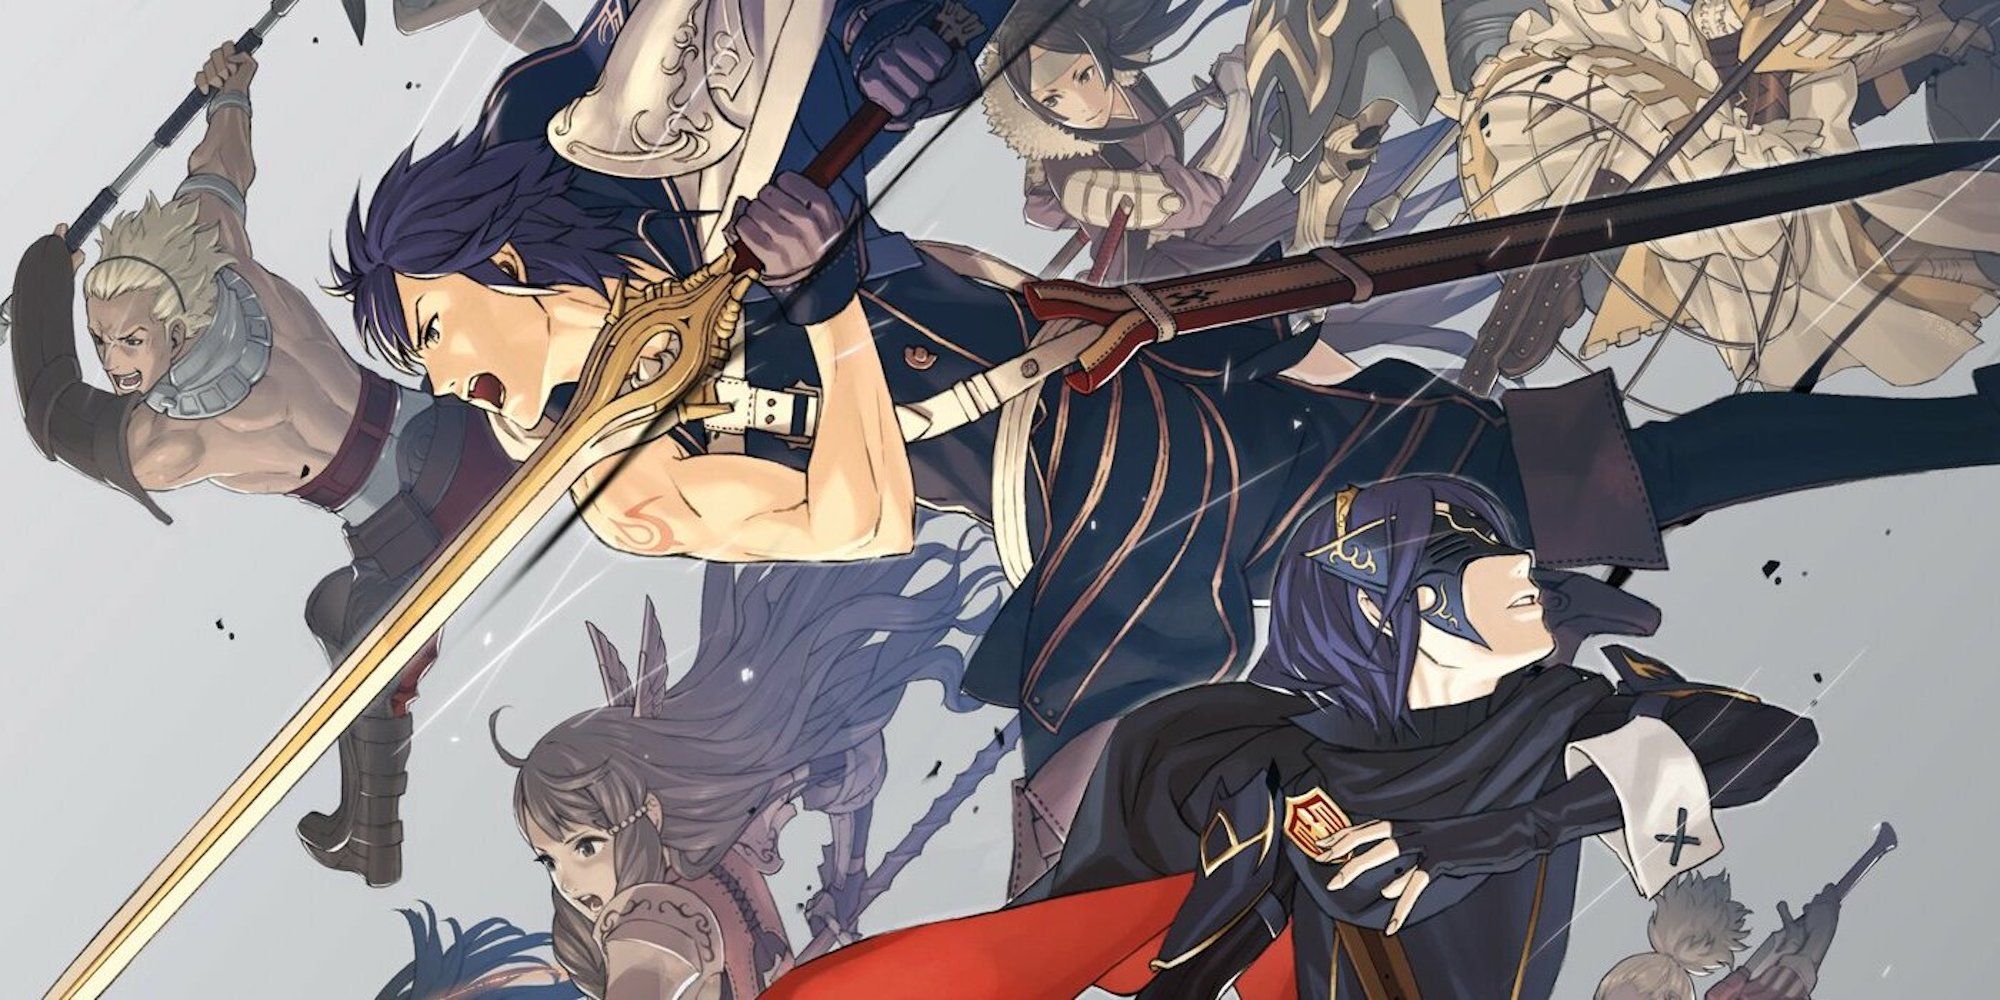 Promo art featuring characters in Fire Emblem-Awakening